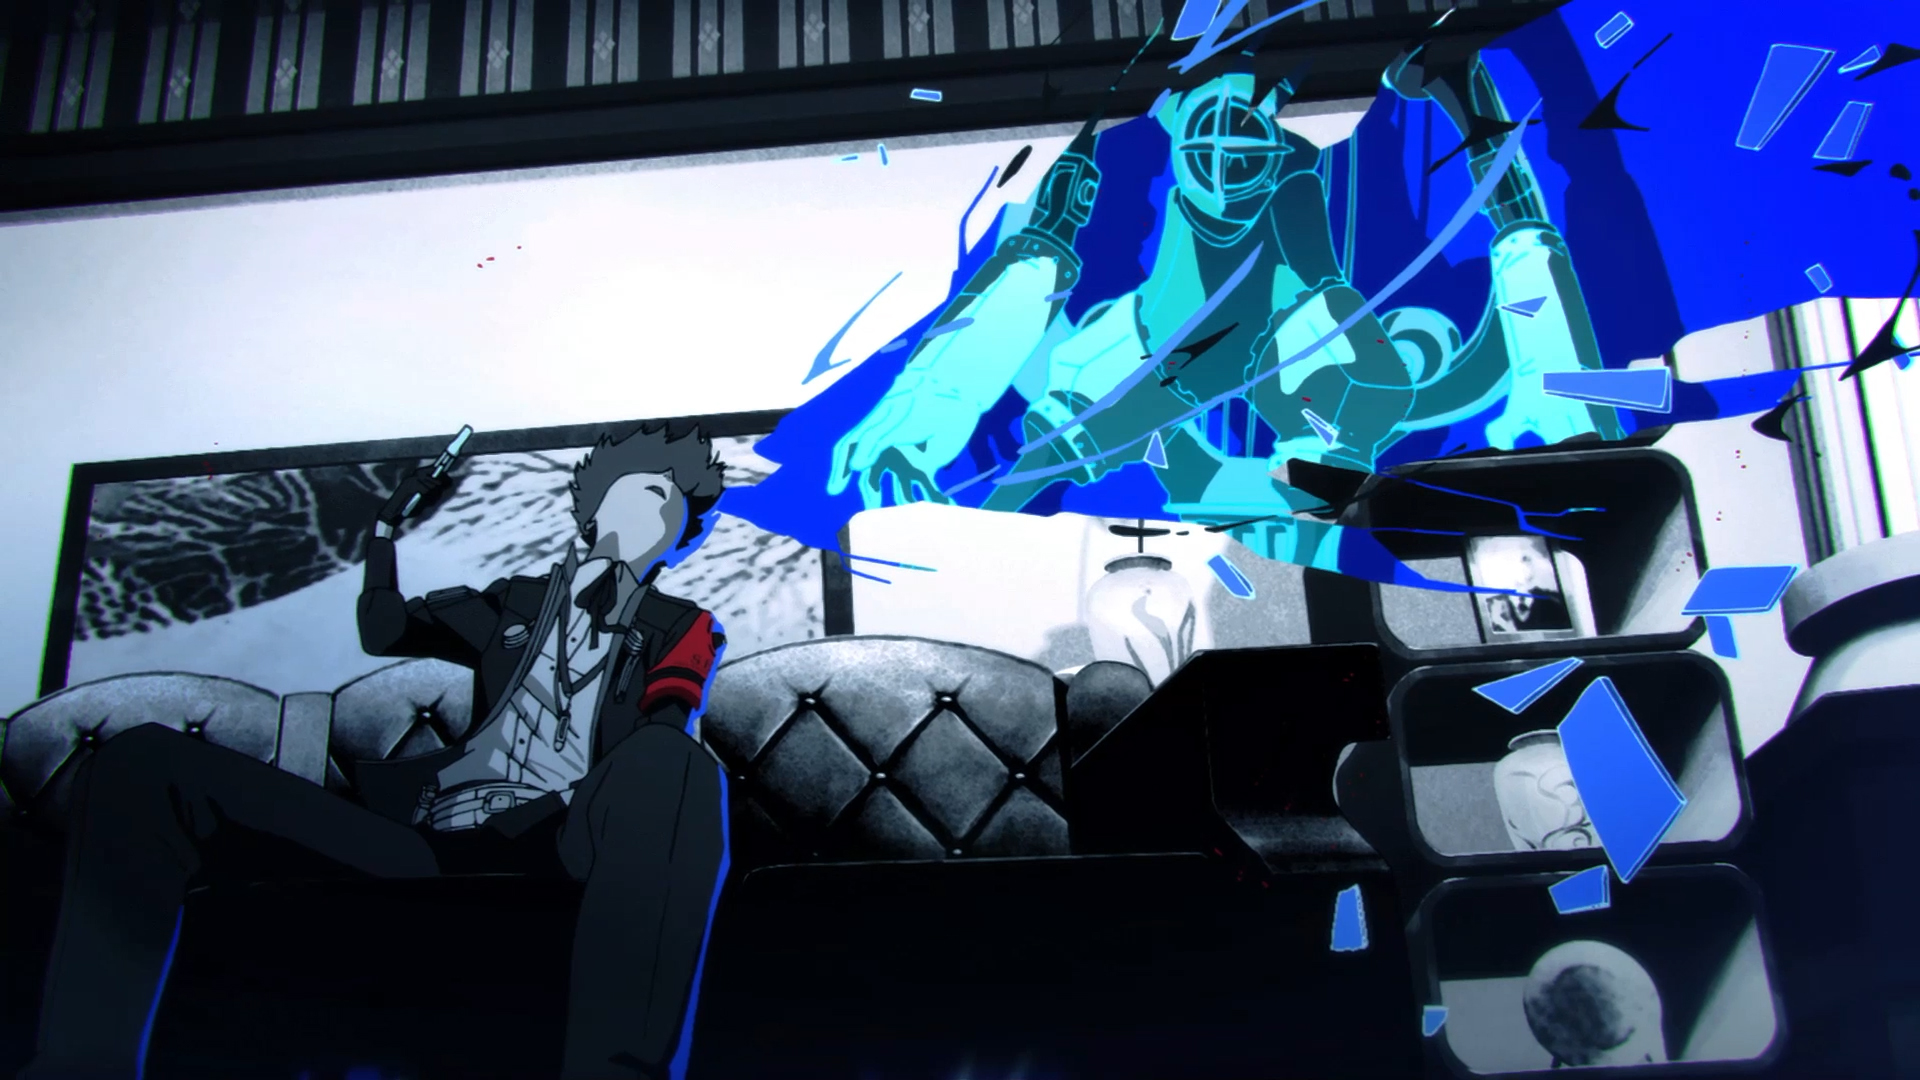 Persona 5: The Royal coming next year with new character, areas and co-op